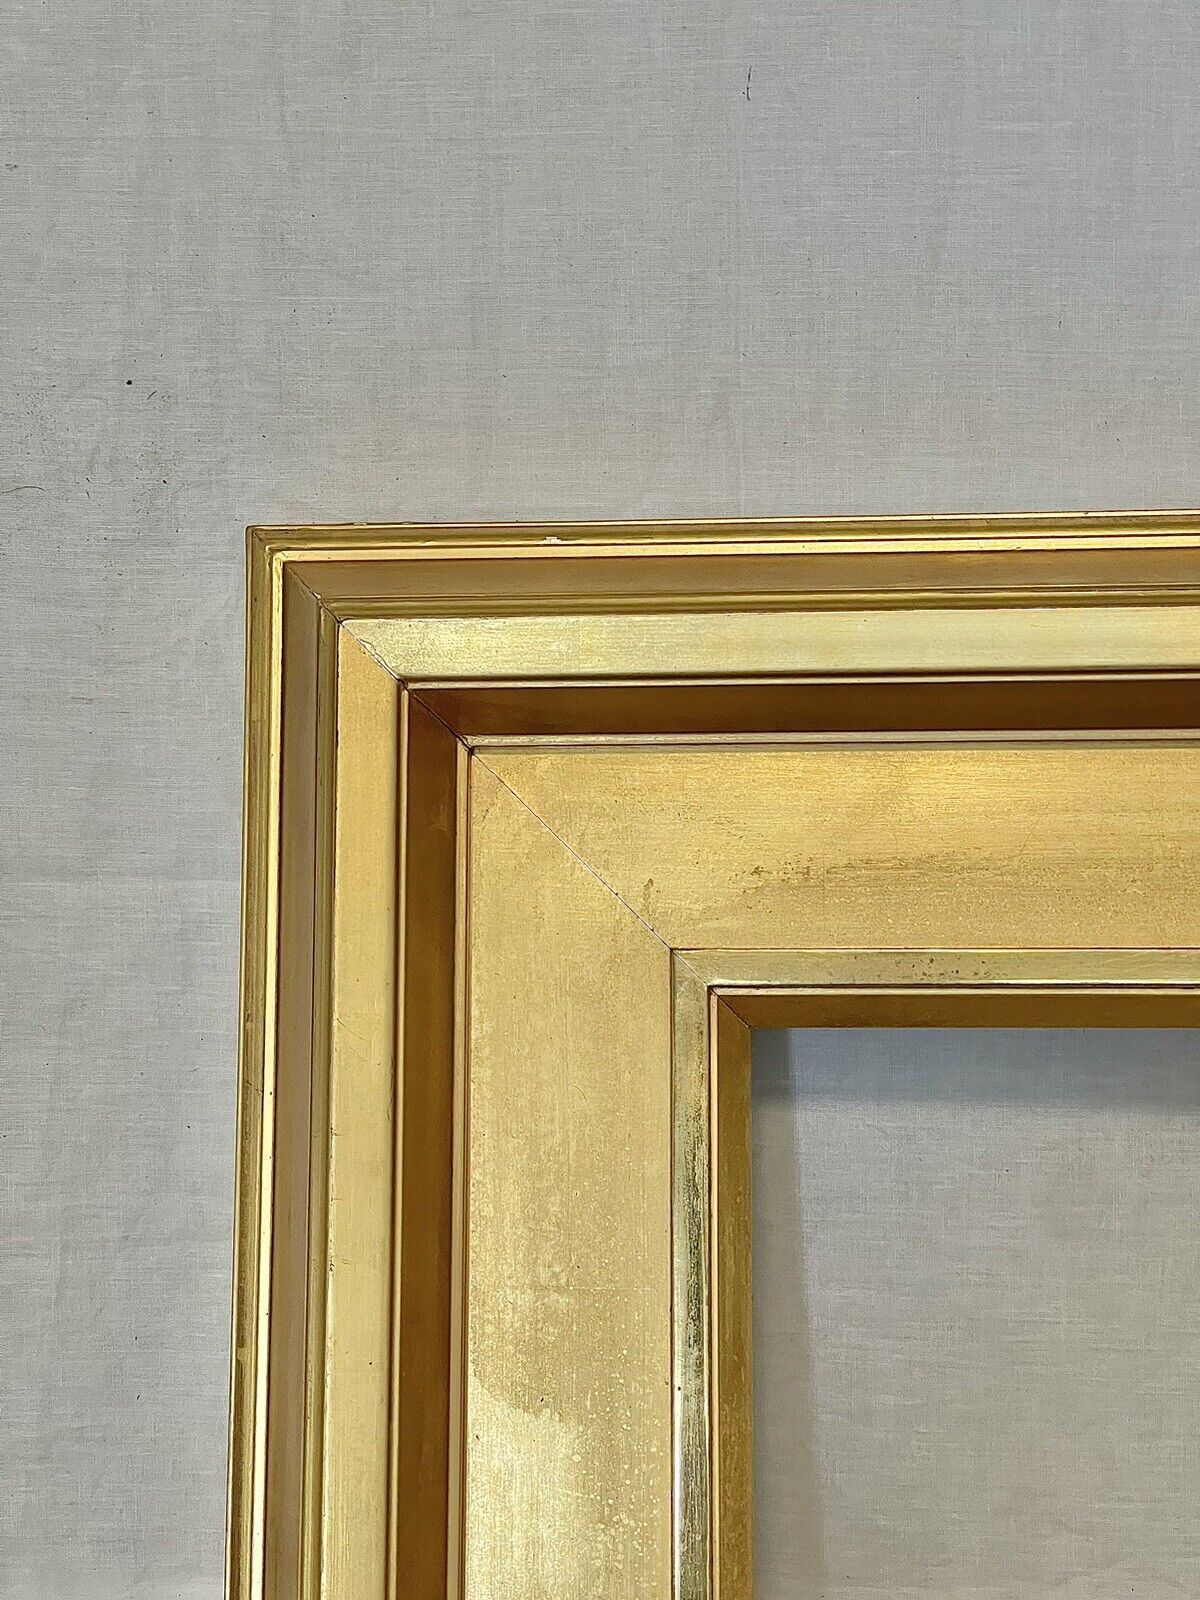 SOLD NFS FRENCH 24k GOLD GILT GESSO DEEP WELL VICTORIAN PICTURE FRAME